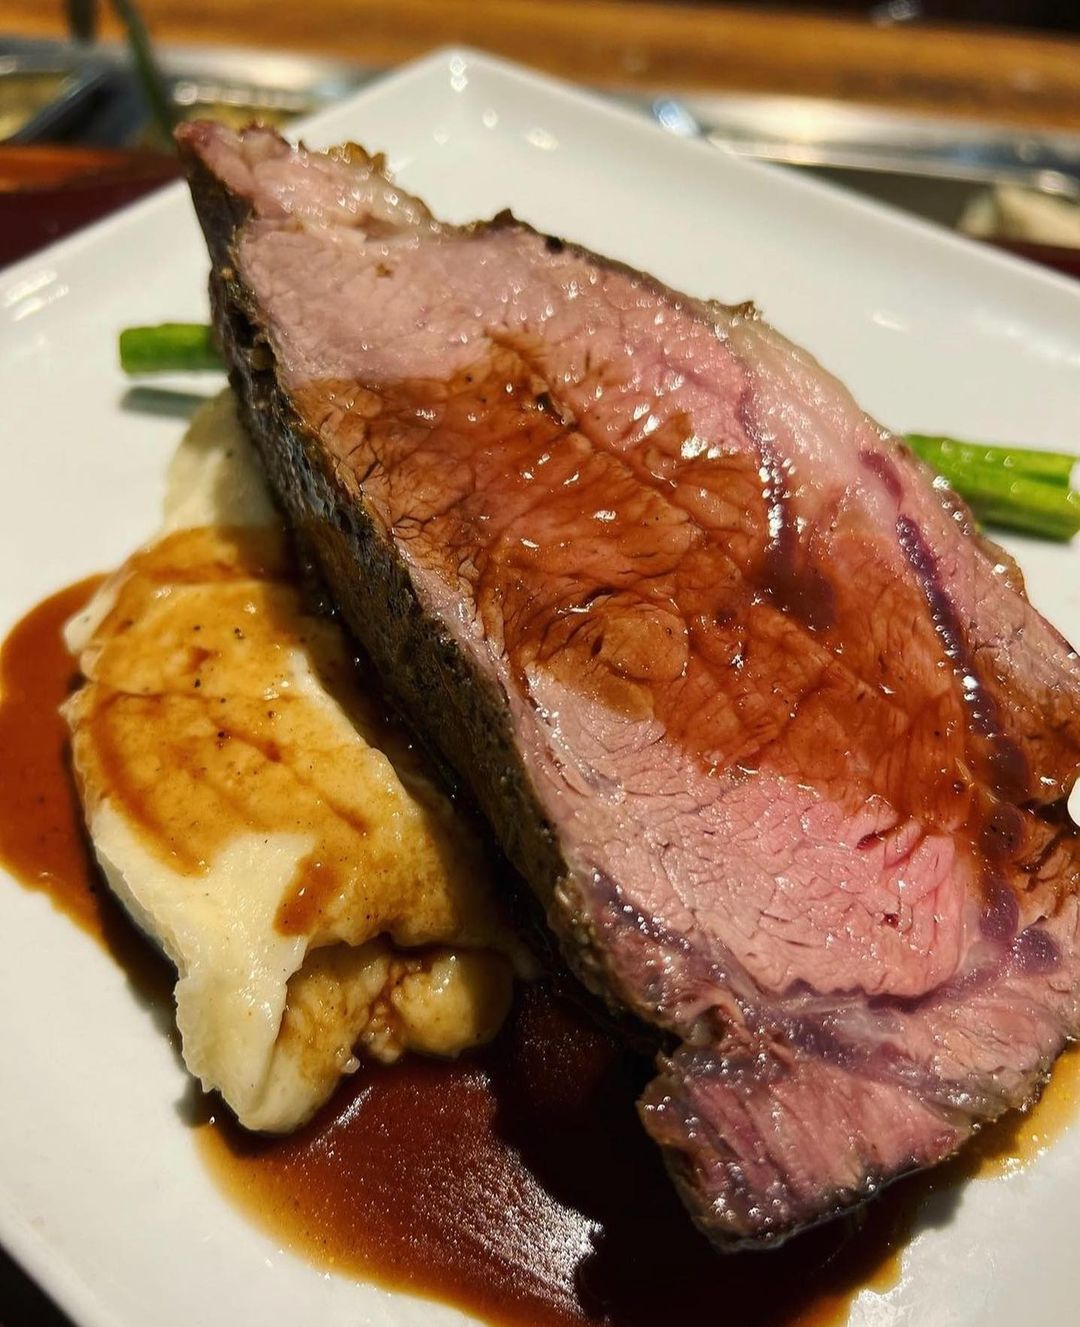 Sunday Special at The Grizzly Grill! Enjoy succulent Prime Rib at a discount – $2 off each cut! Choose from our mouth-watering 10oz, 12oz, or 14oz options. A delectable Sunday feast awaits you.